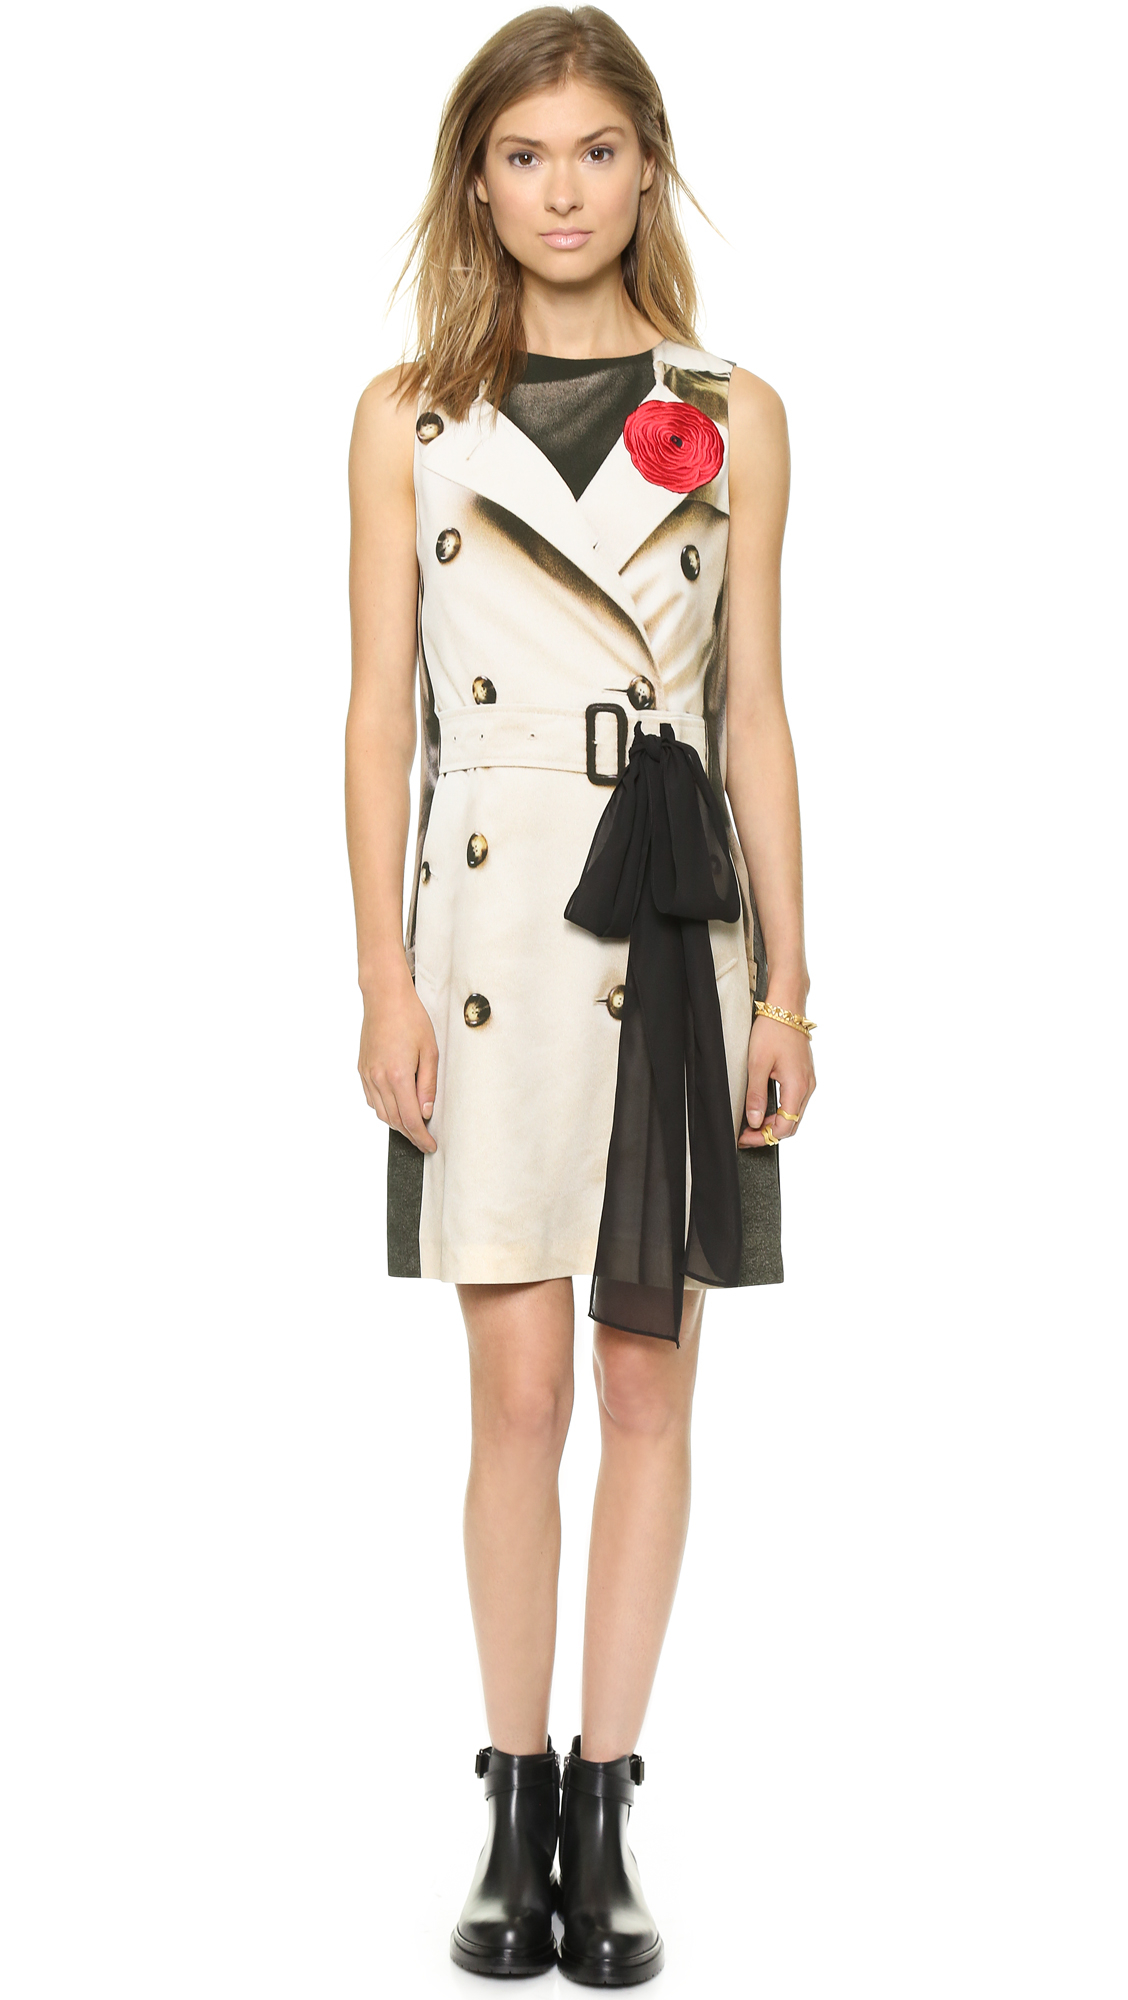 Moschino Cheap and Chic Trench Dress Black | Lyst